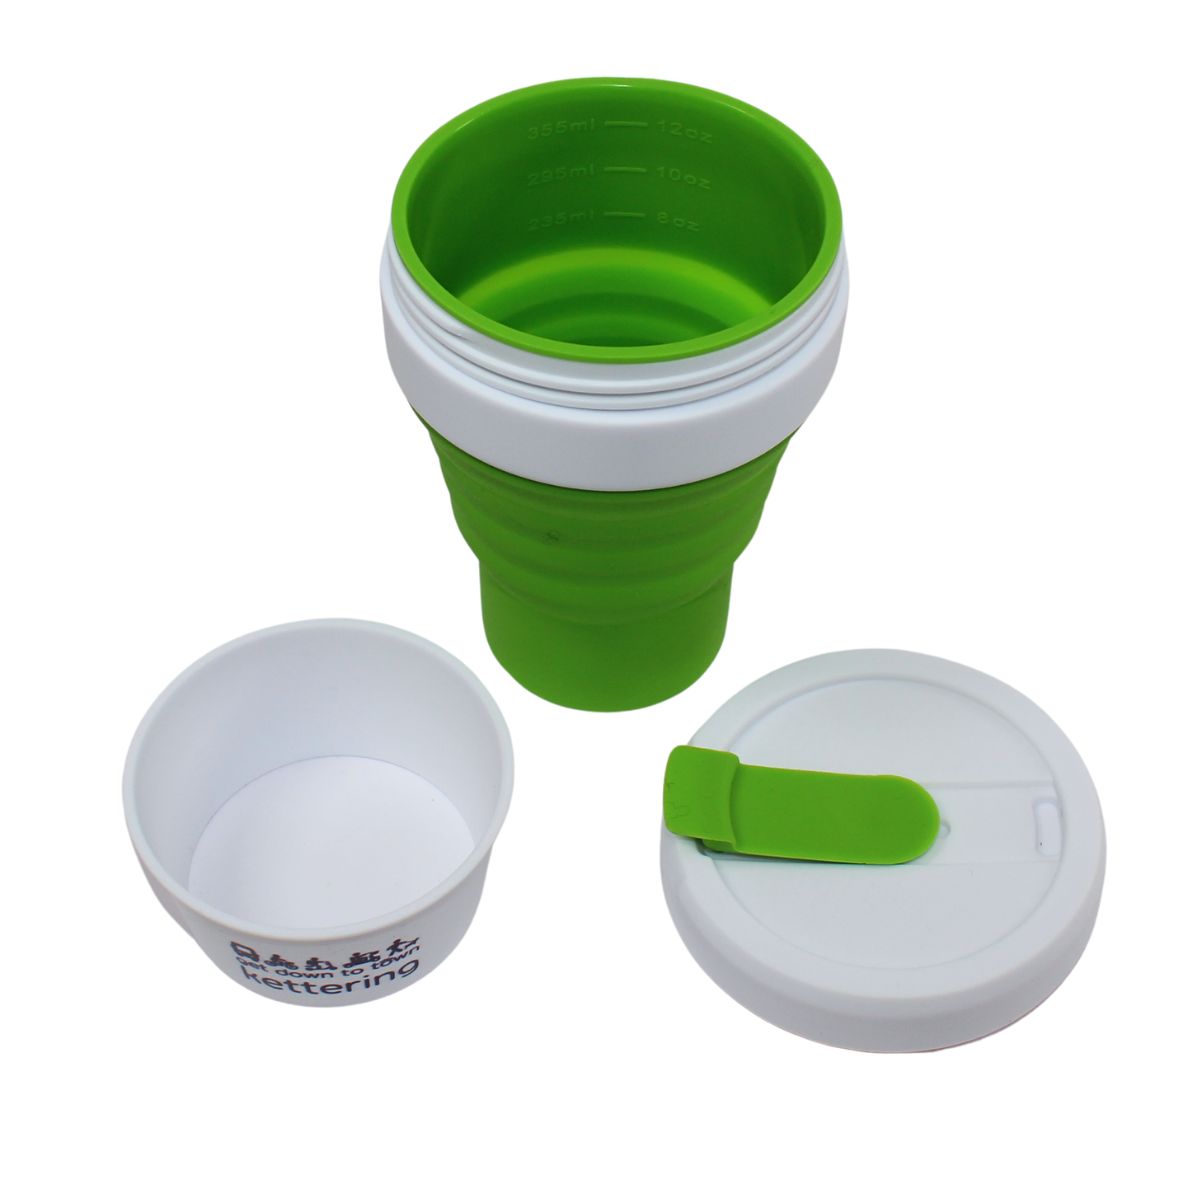 Collapsible Cup, showing all pieces